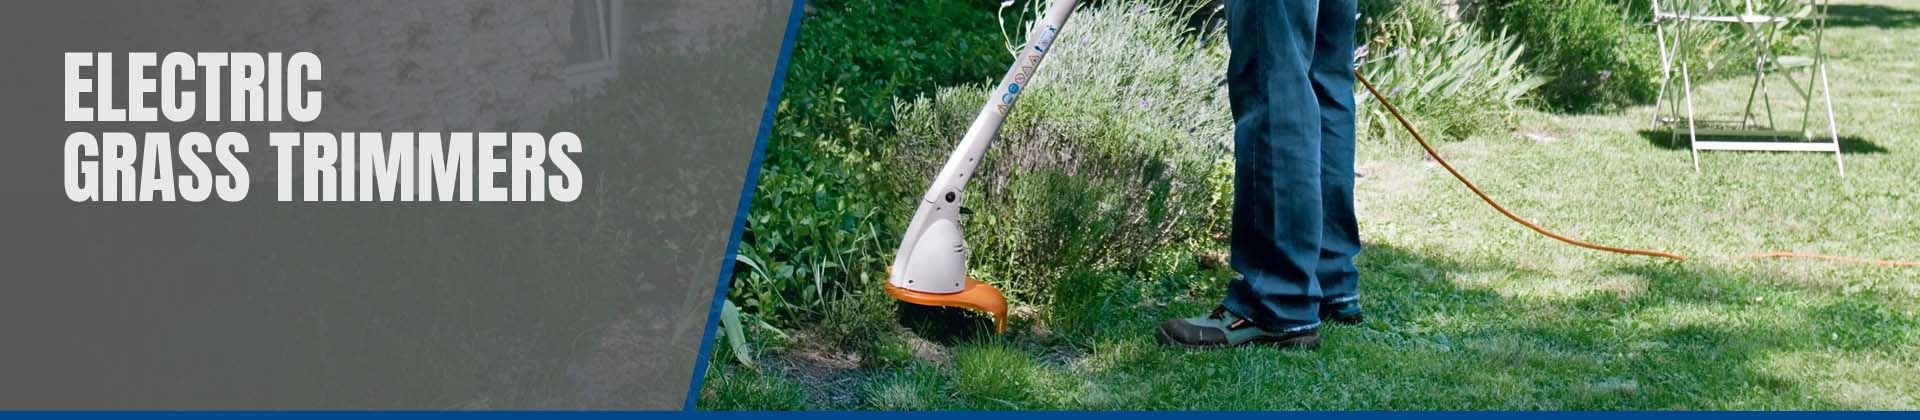 Electric Grass Trimmers - SHOP NOW